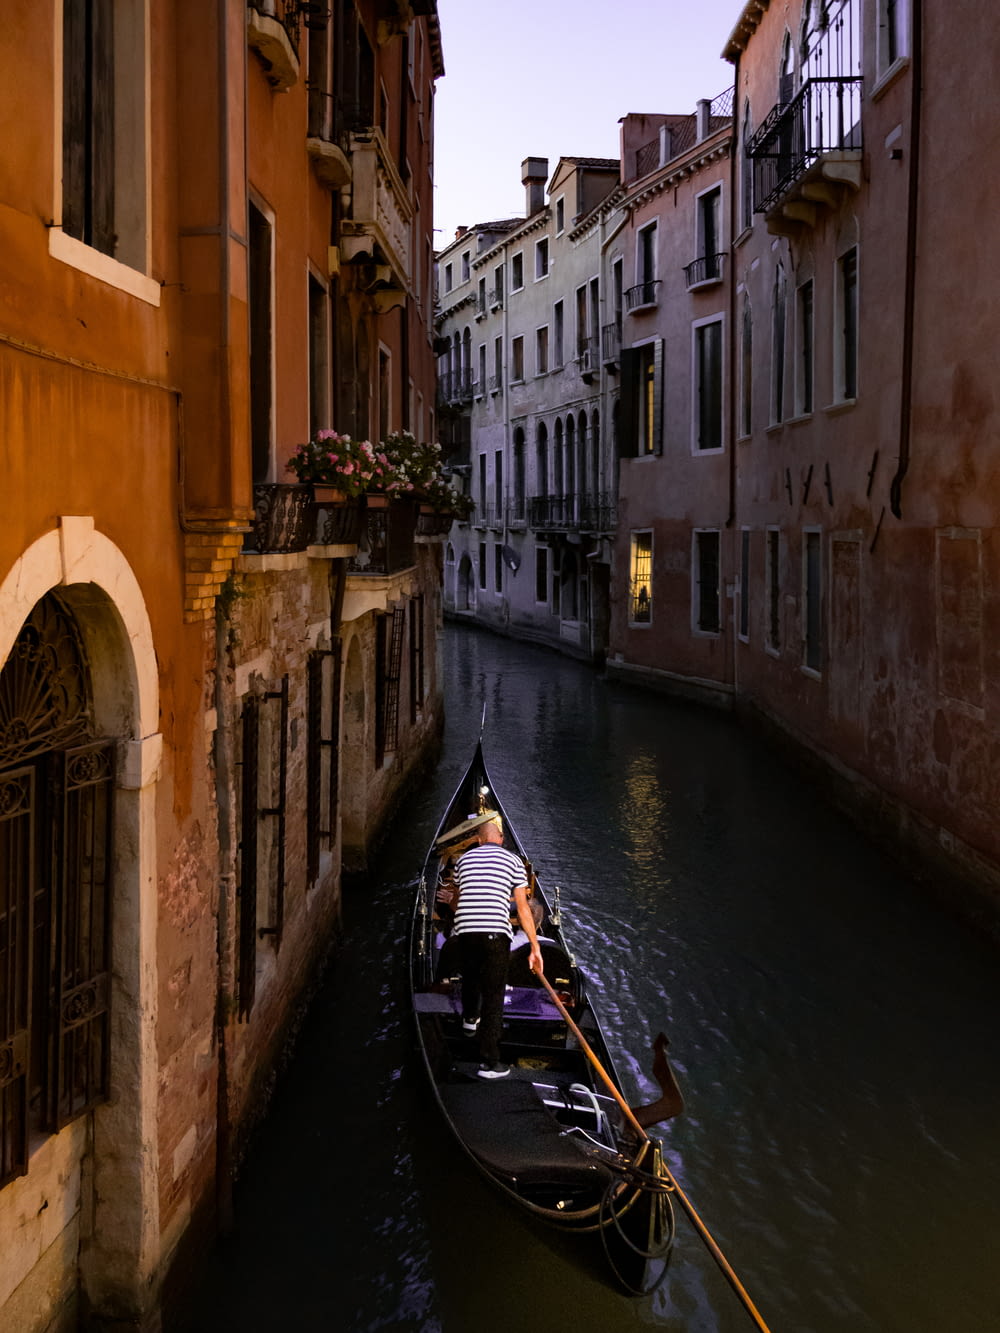 a gondola in a narrow canal between two buildings